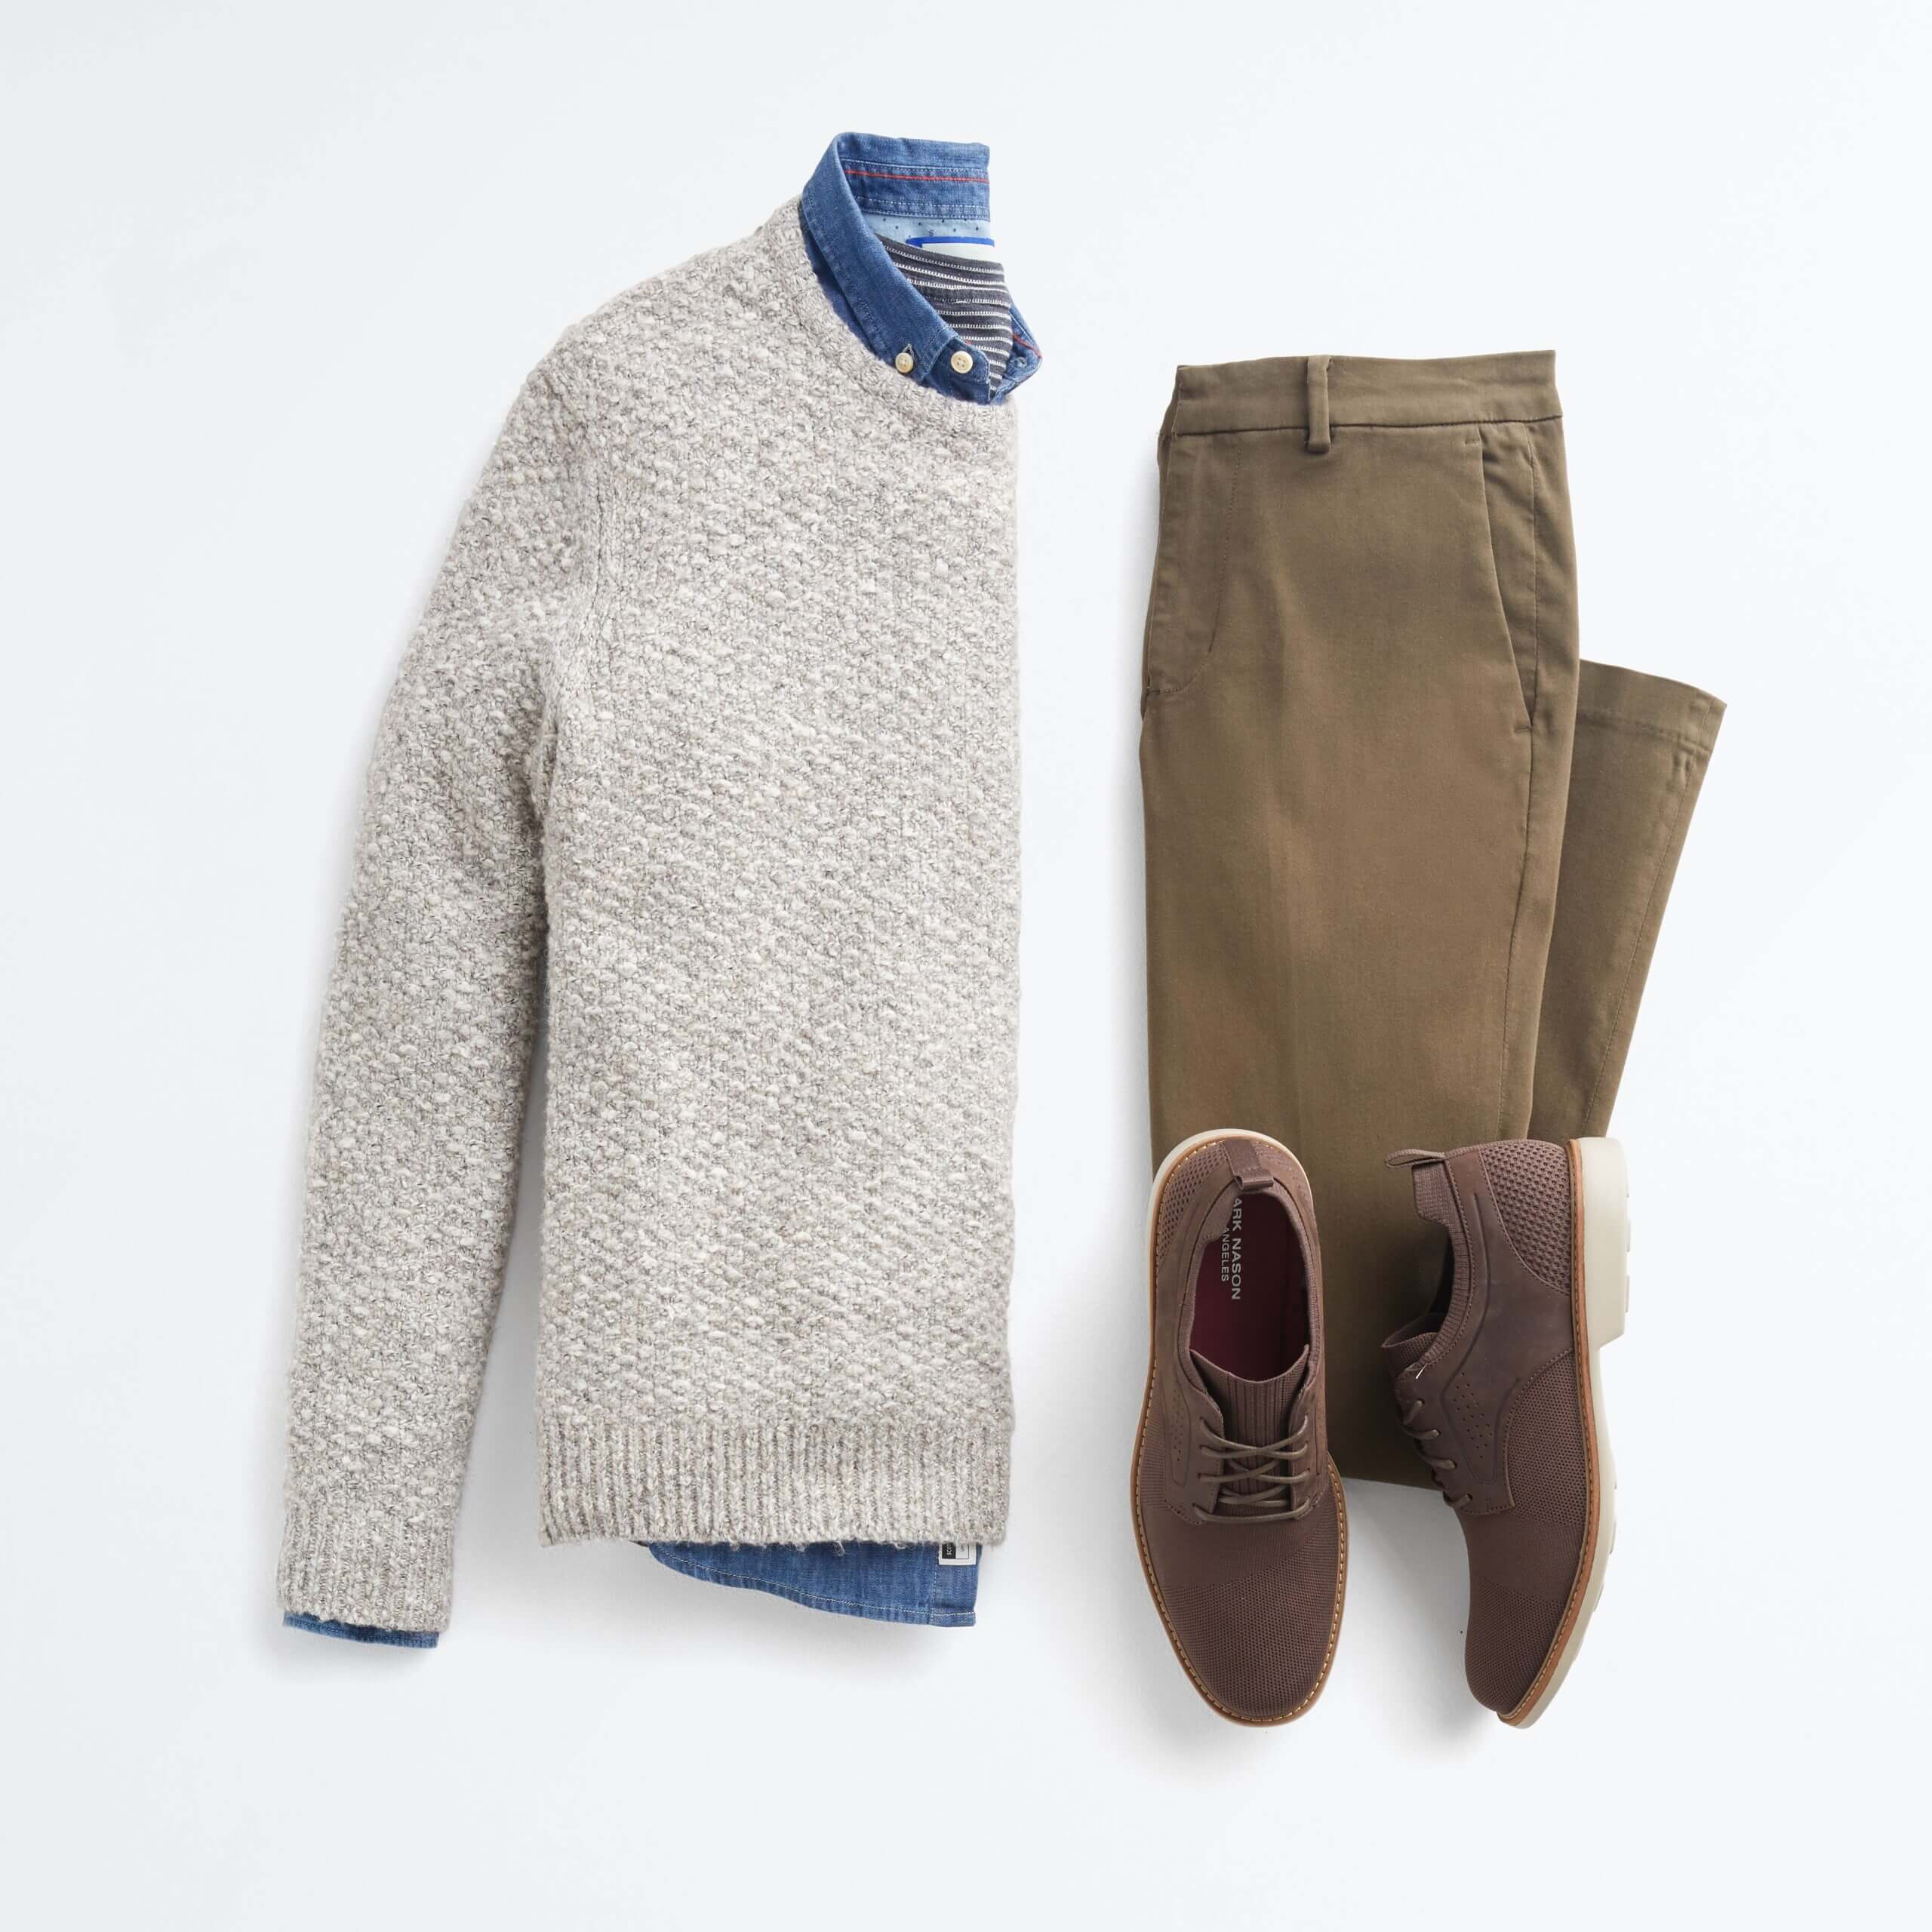 Stitch Fix Men’s Outfit featuring blue chambray top, beige sweater and brown loafers.